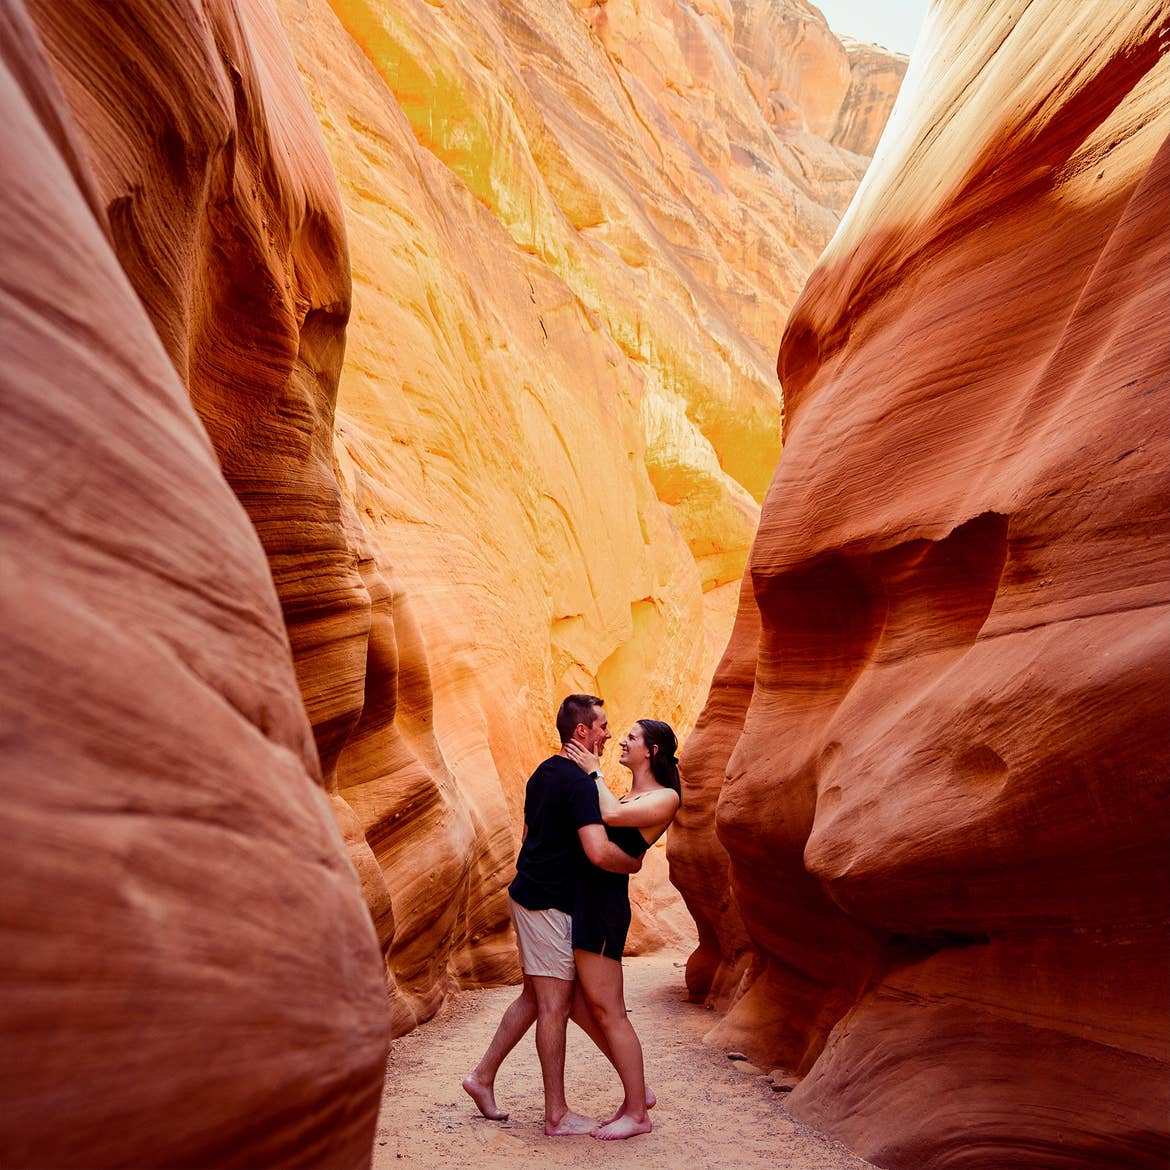 A man and woman wearing black outfits embrace in a red rock formation.